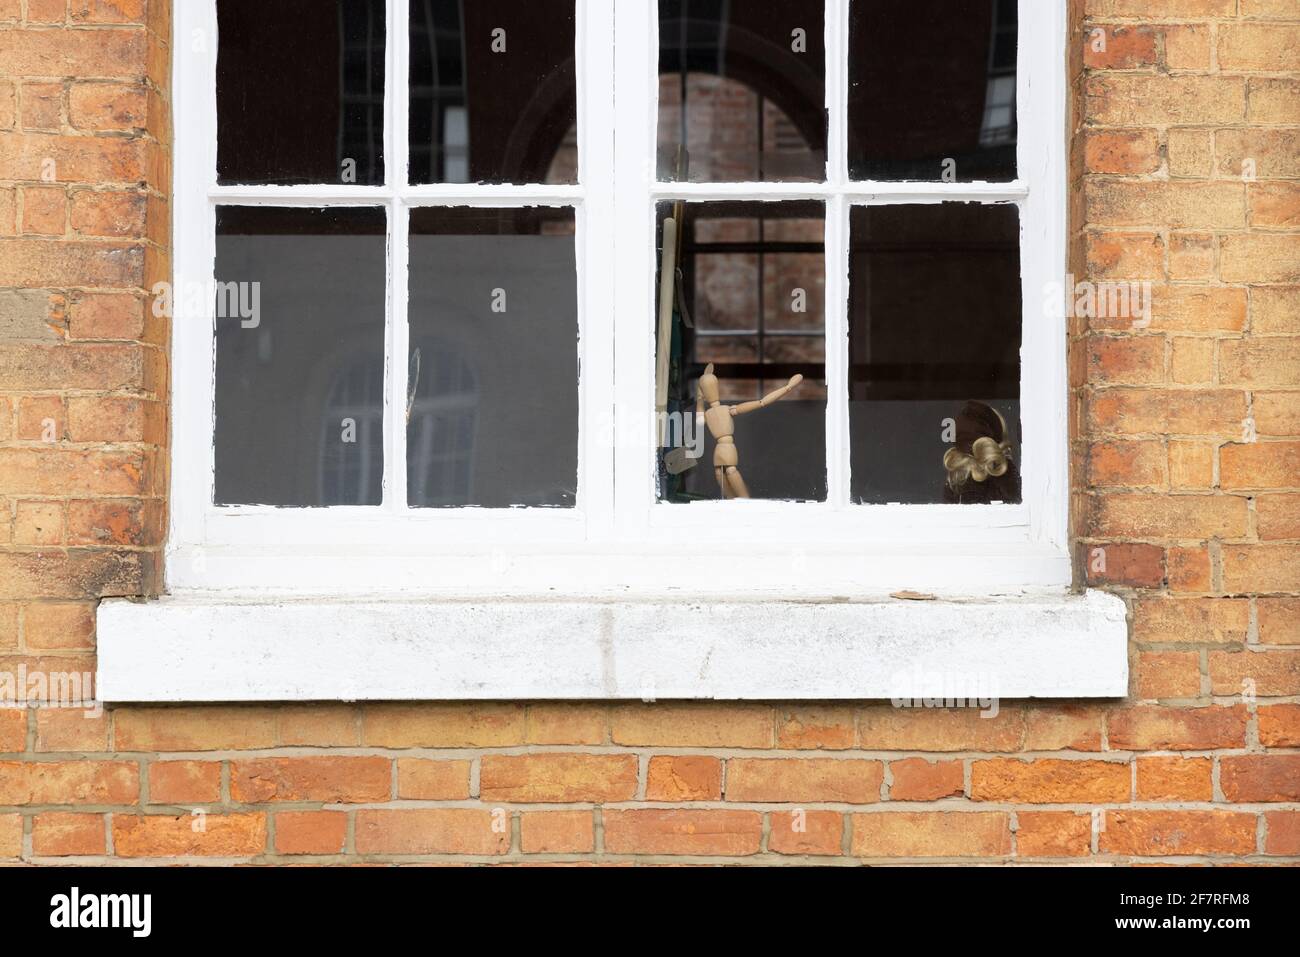 Weedon, Northamptonshire, UK - March 18th 2021: A wooden artist's mannequin appears to be dancing by a white, wooden-framed sash window. Stock Photo